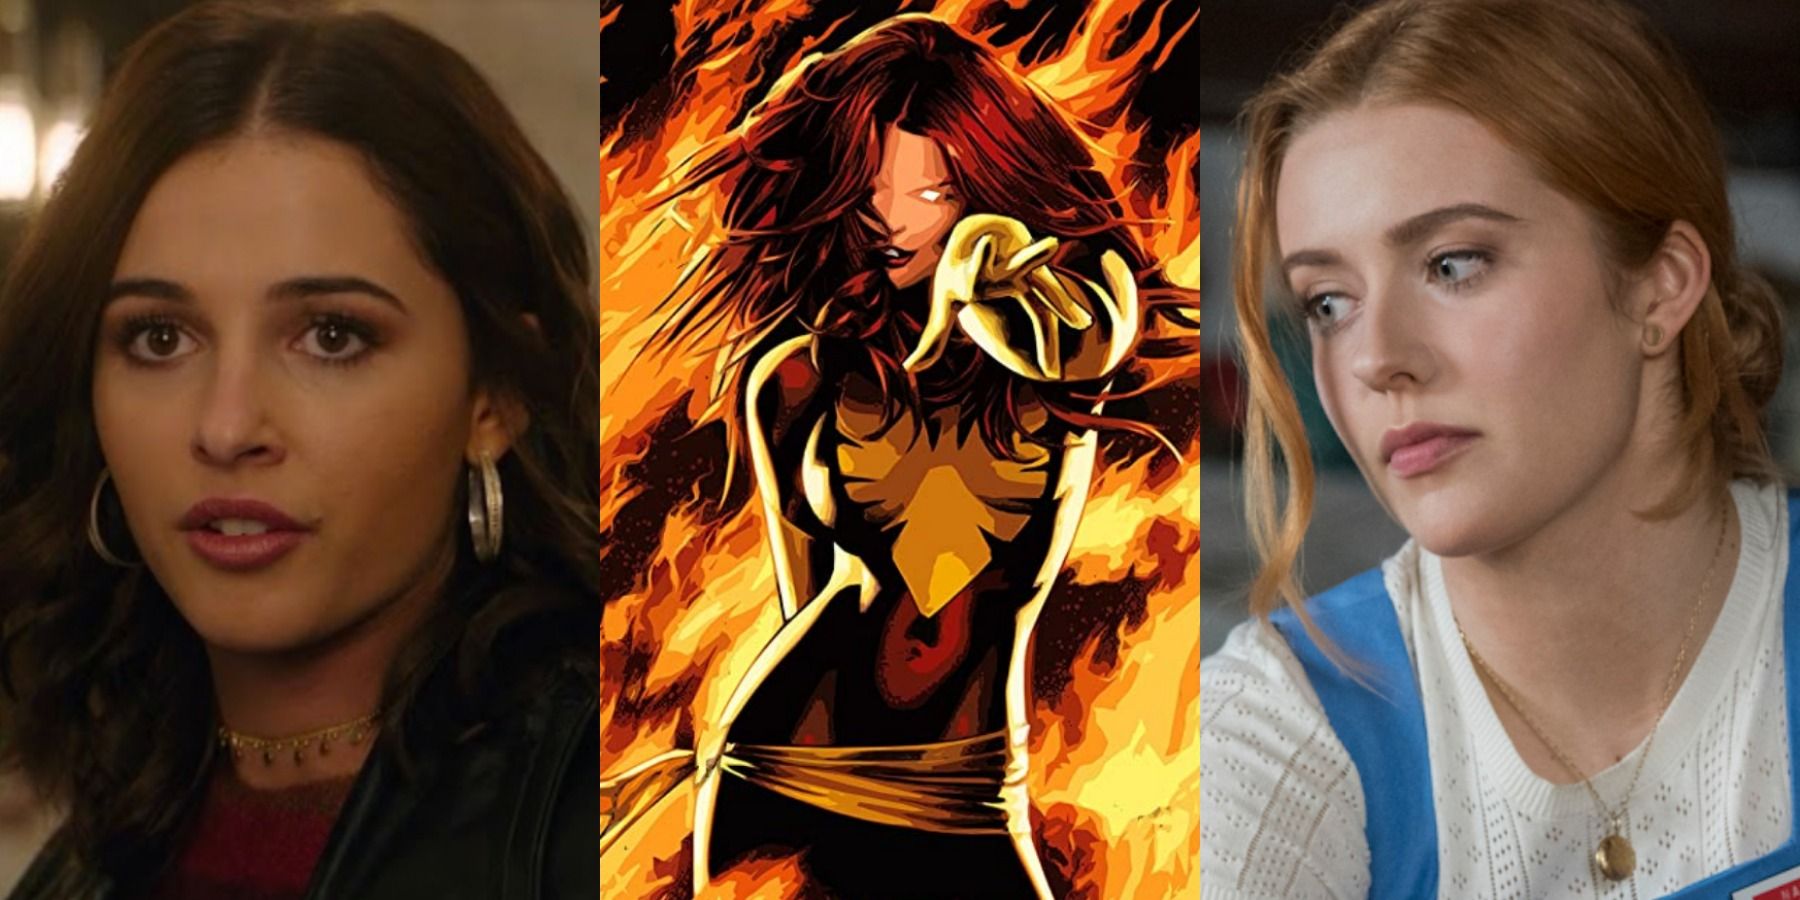 A split image depicts Naomi Scott in Charlie's Angels, Jean Grey as the Phoenix in Marvel Comics, and Kennedy McMann as Nancy Drew